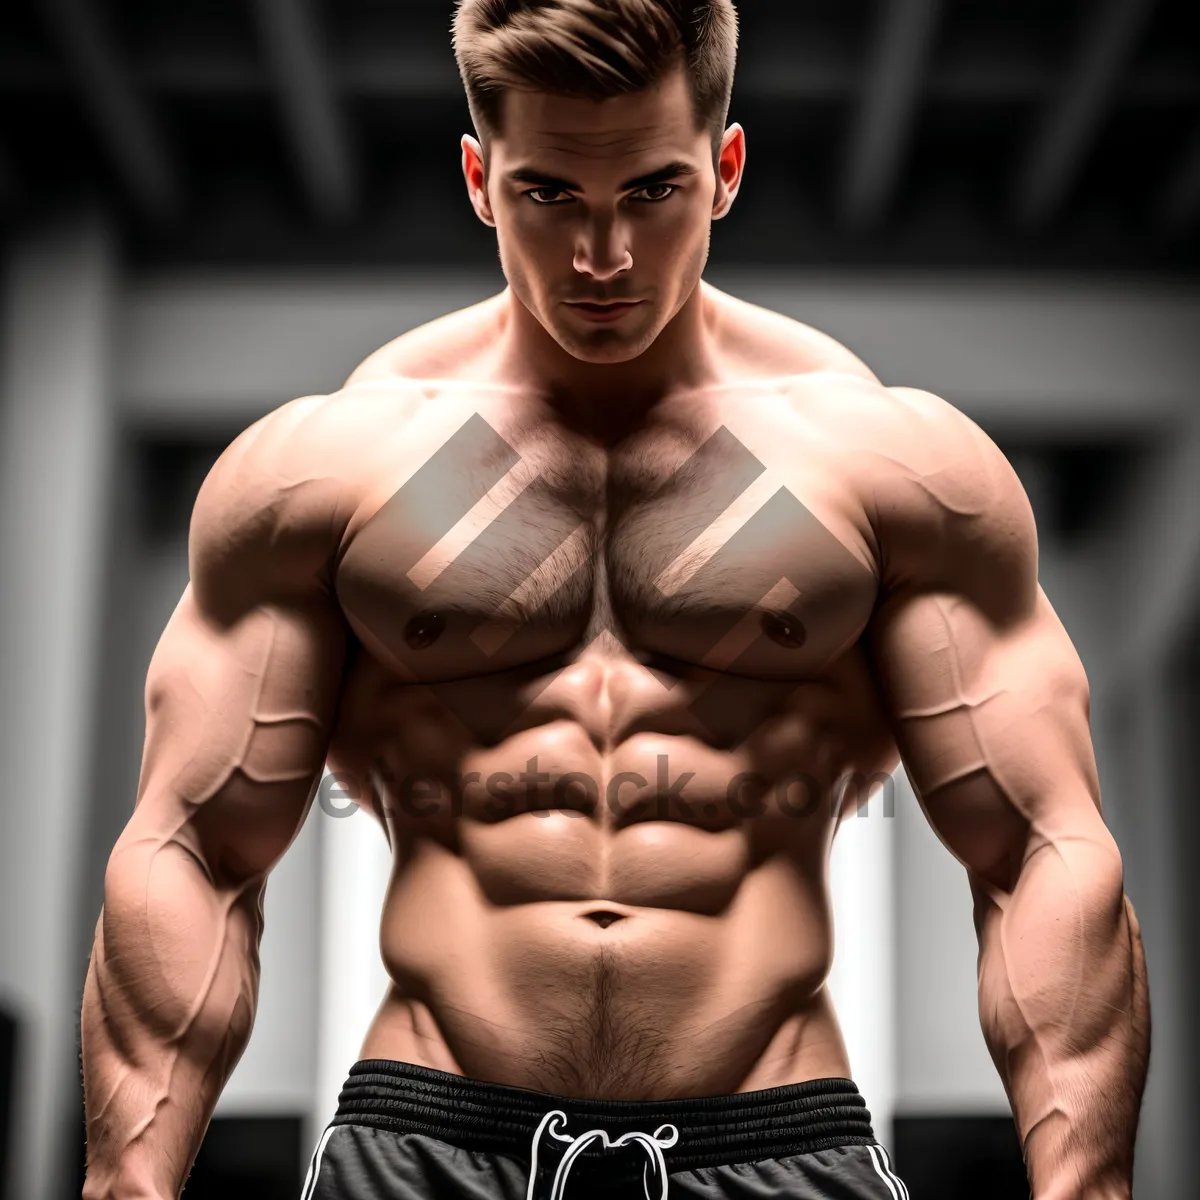 Picture of Muscular male body with impressive abs and biceps.